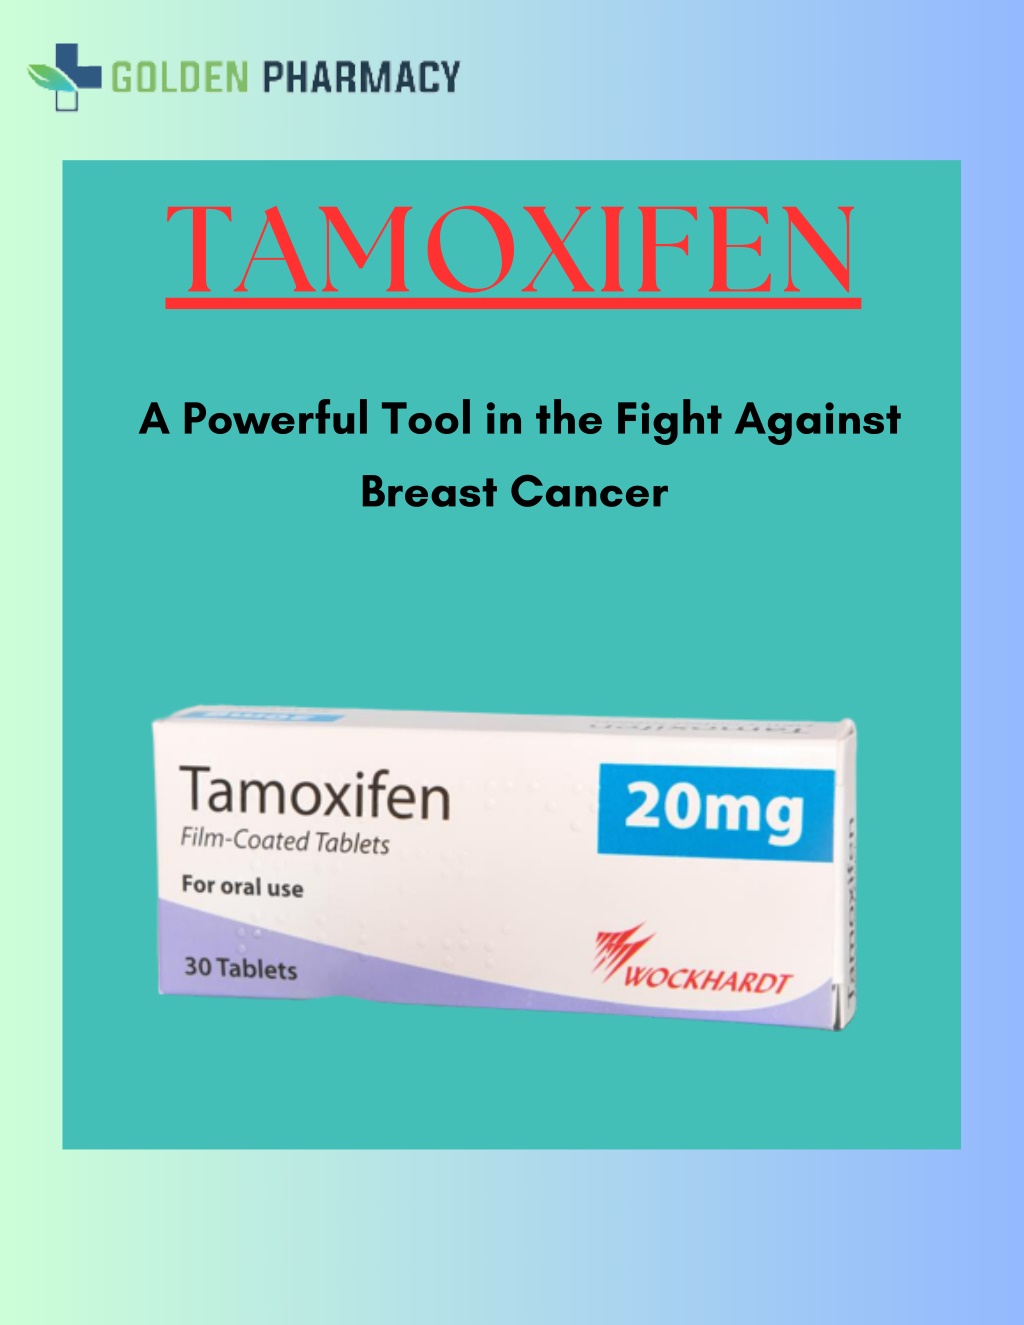 PPT _Tamoxifen A Powerful Tool in the Fight Against Breast Cancer